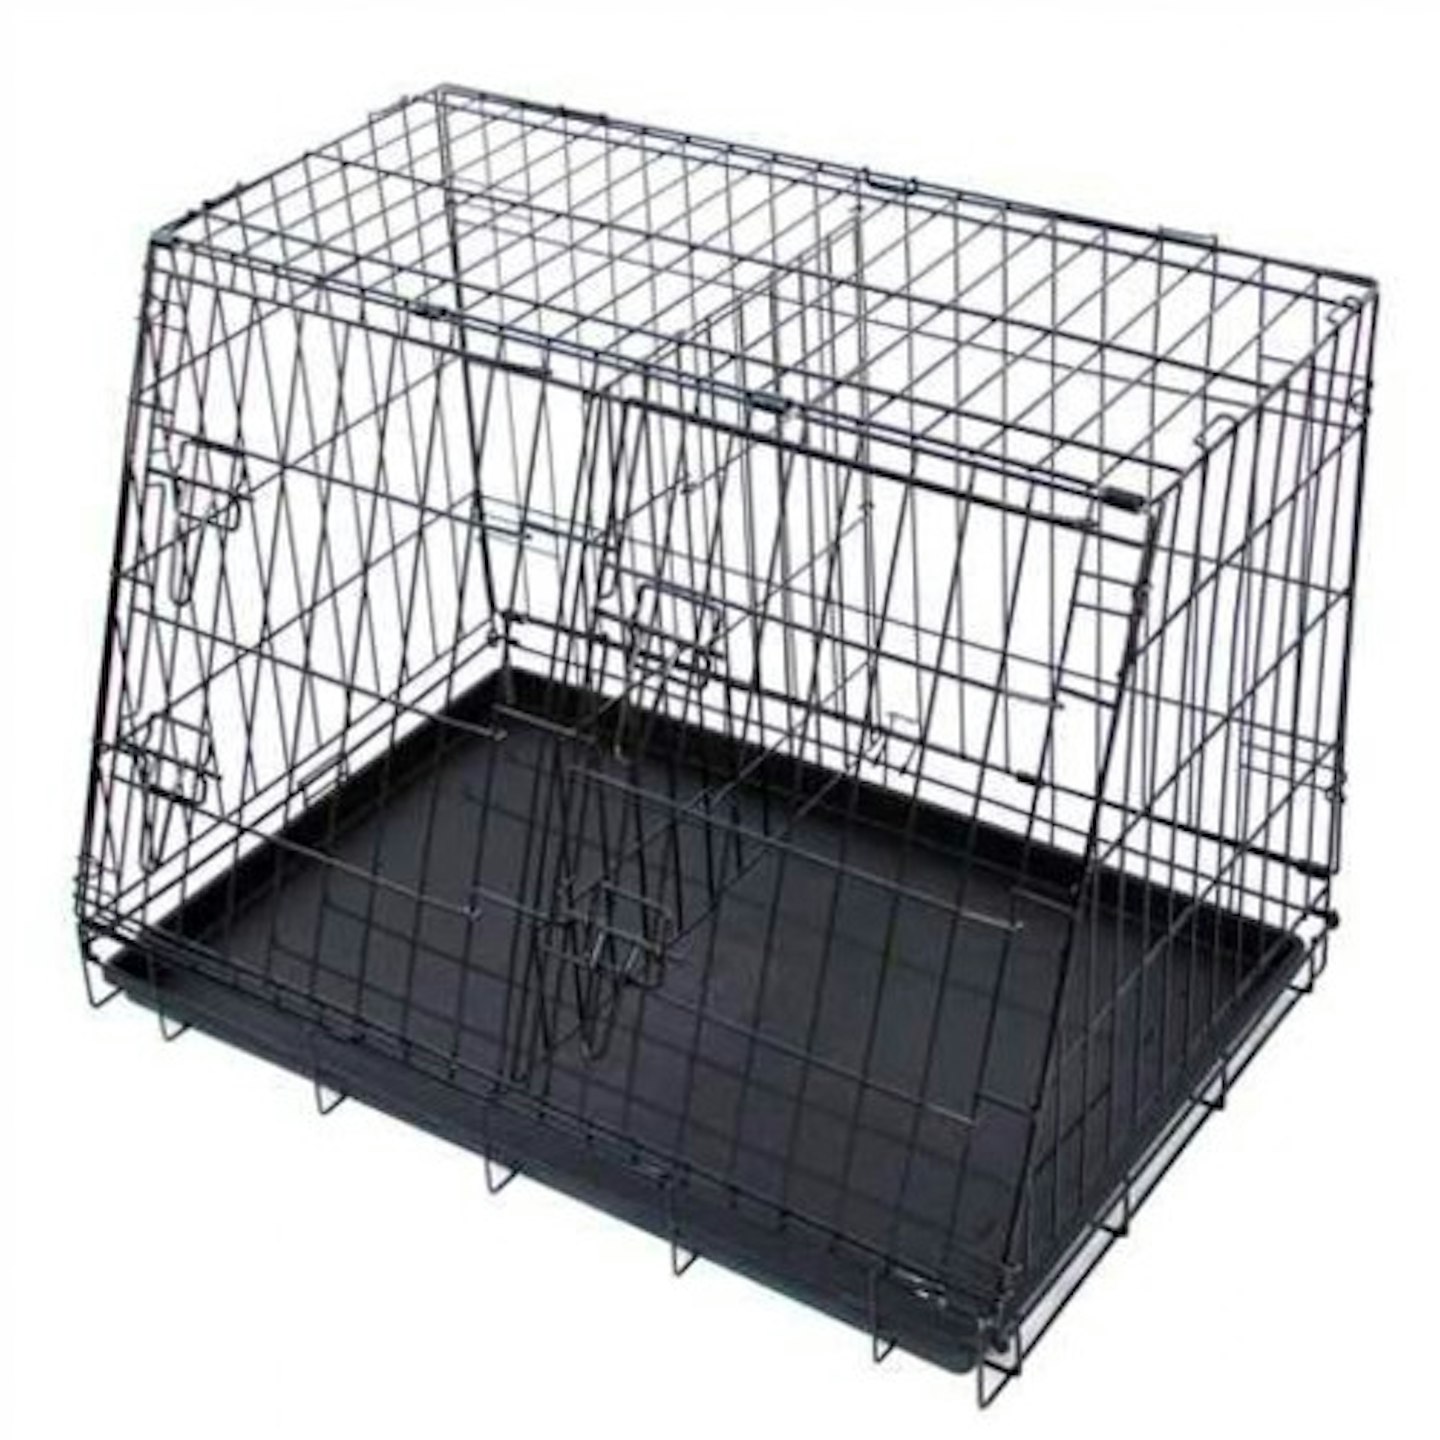 https://www.petplanet.co.uk/p32809/petplanet_sloping_dog_cage_with_mat_large.aspx